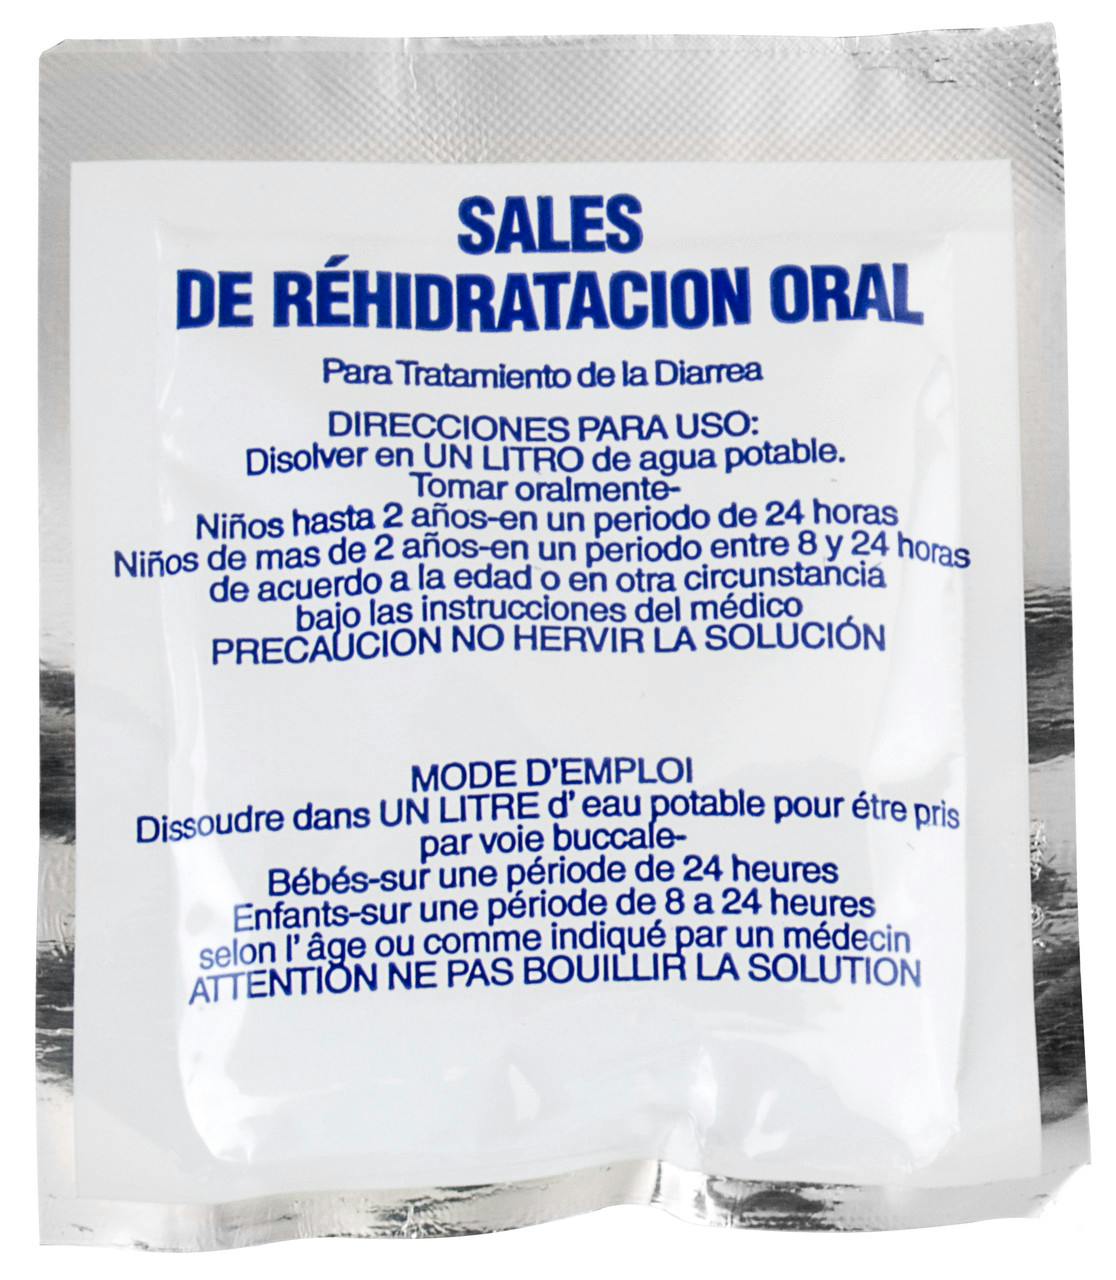 Oral Rehydration Salts (3 Pack) NO_COLOUR